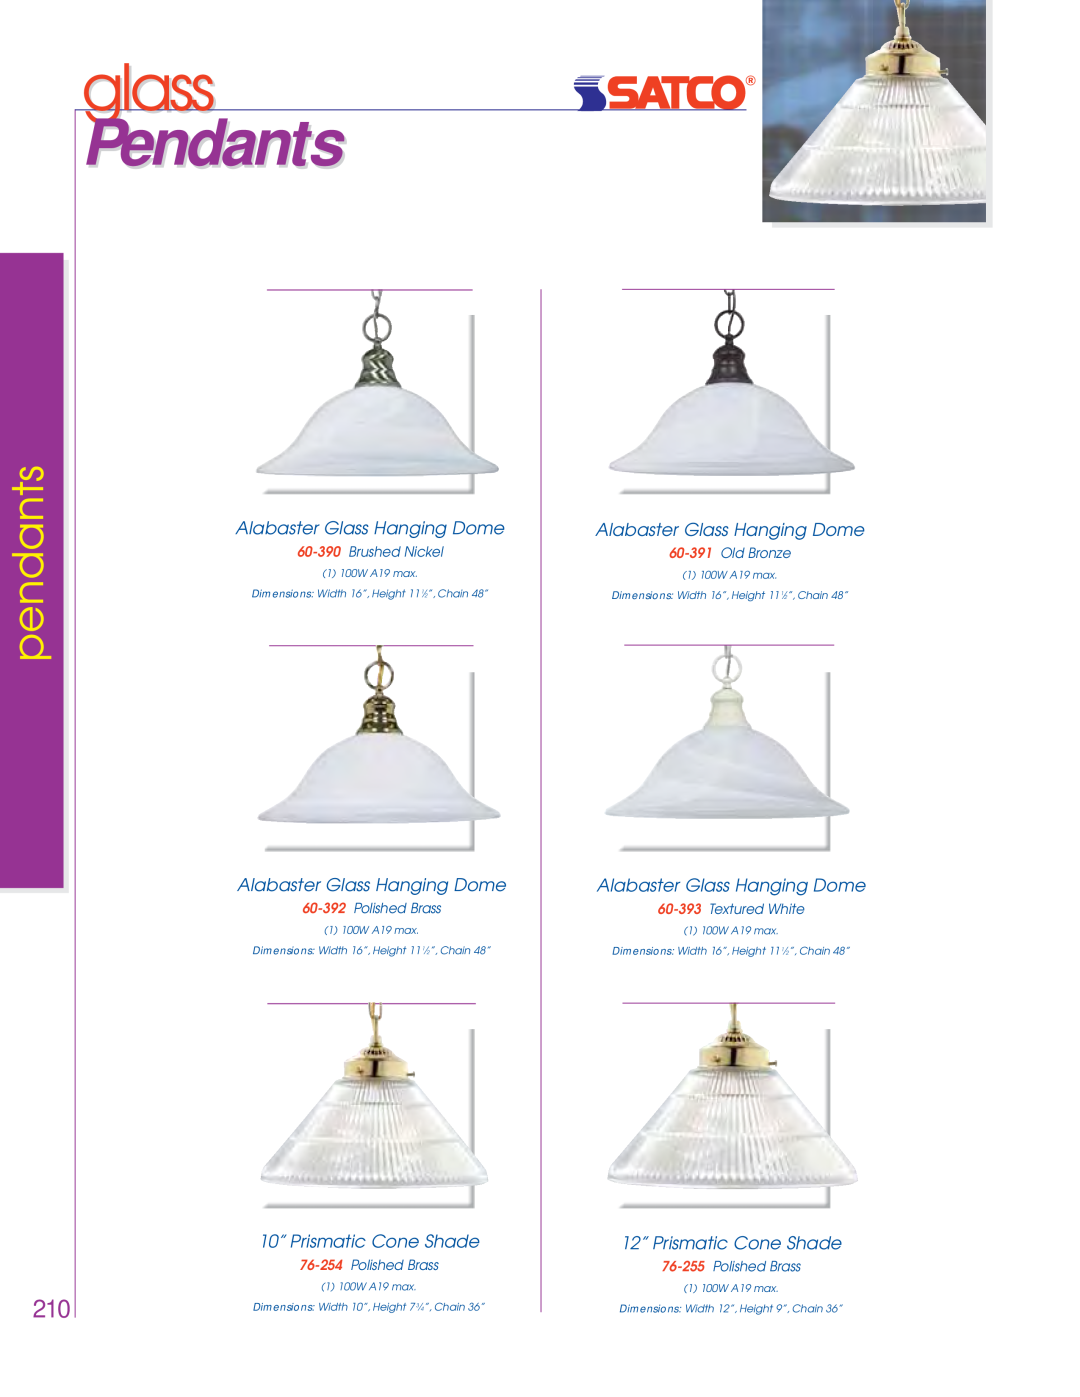 Satco Products 76-449 glass, Pendants, Alabaster Glass Hanging Dome, 10” Prismatic Cone Shade, 12” Prismatic Cone Shade 